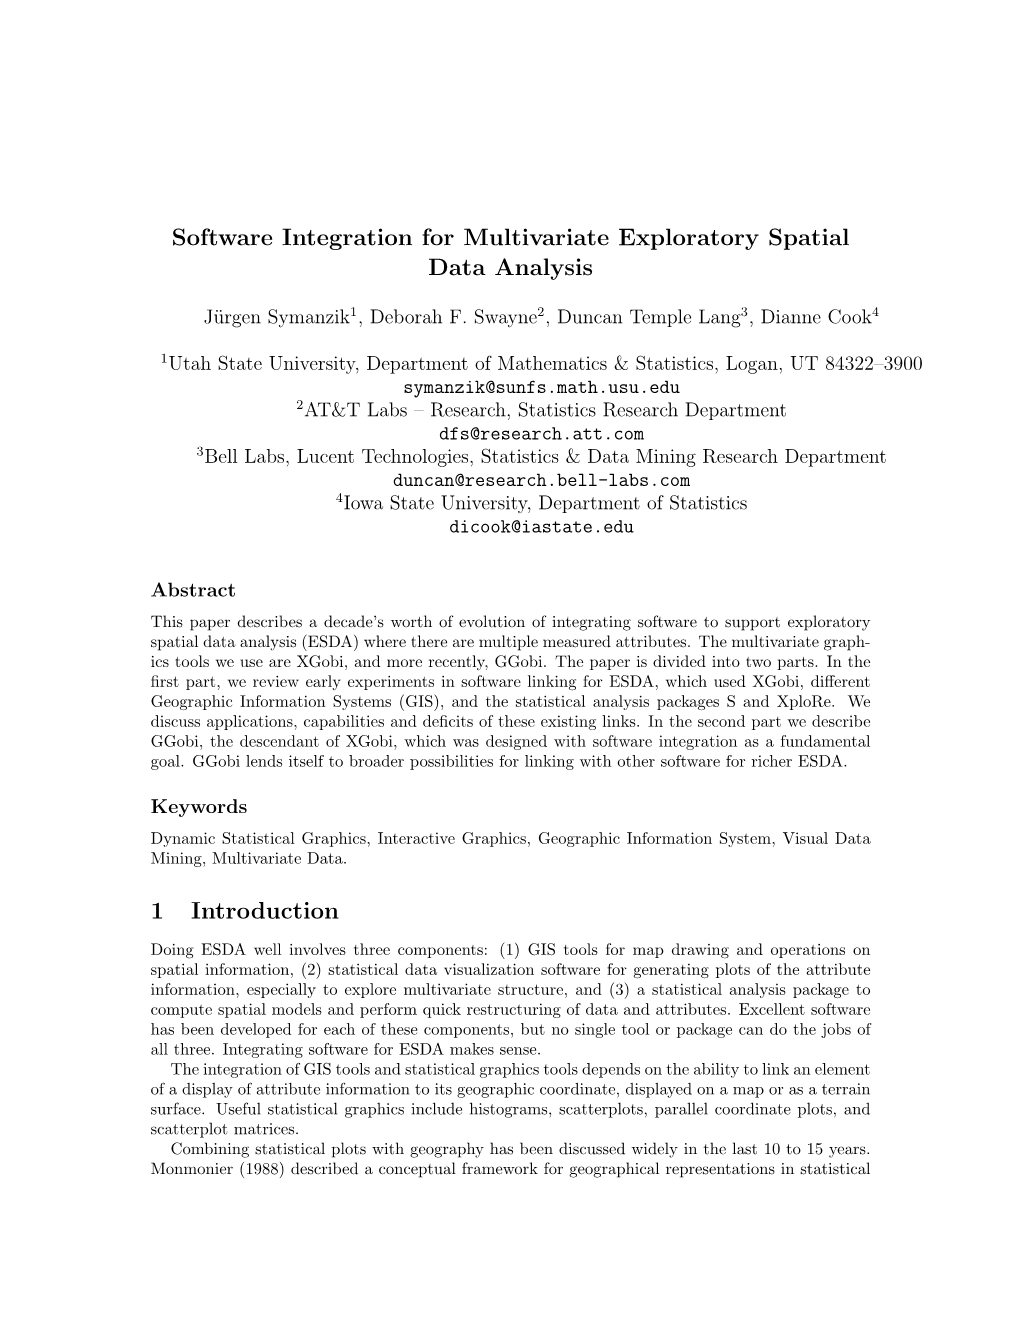 Software Integration for Multivariate Exploratory Spatial Data Analysis 1 Introduction